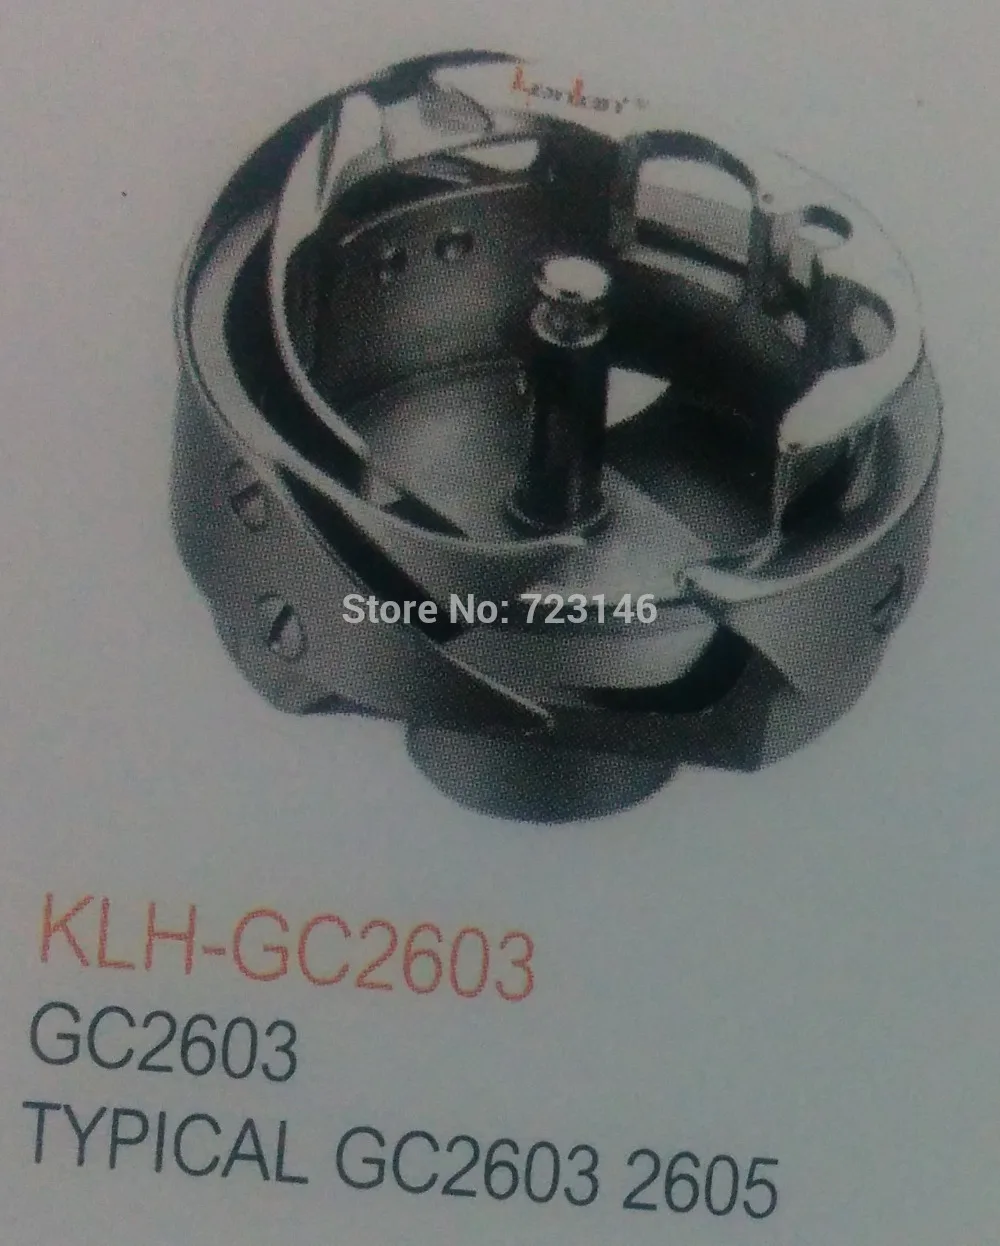 ROTARY HOOK KLH-GC2603 FOR GC2603 TYPICAL GC2603 2605